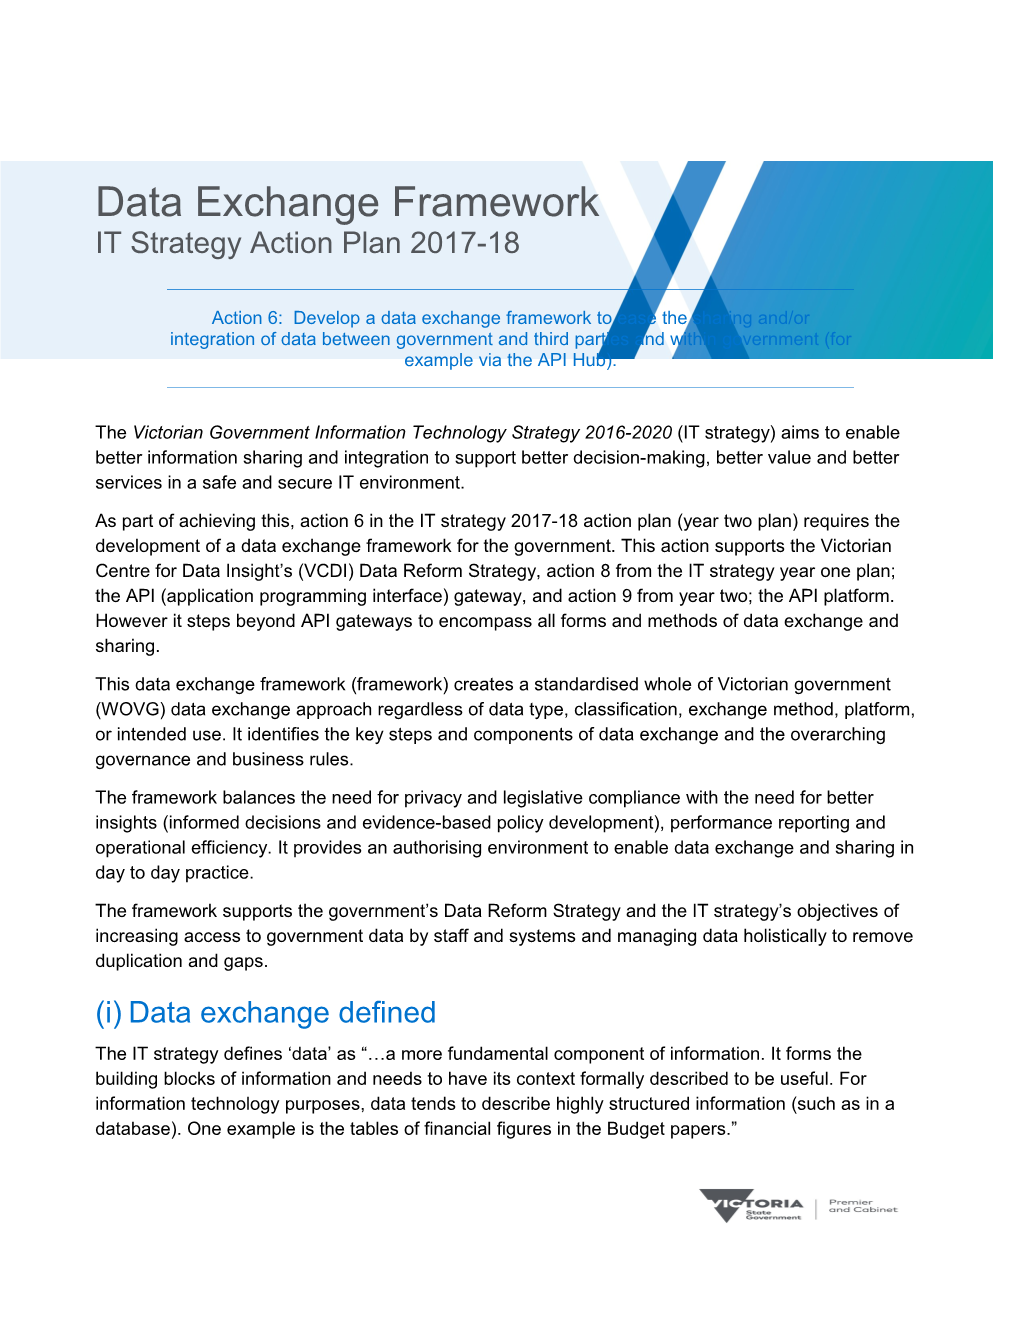 Action 6: Develop a Data Exchange Framework to Ease the Sharing And/Or Integration of Data